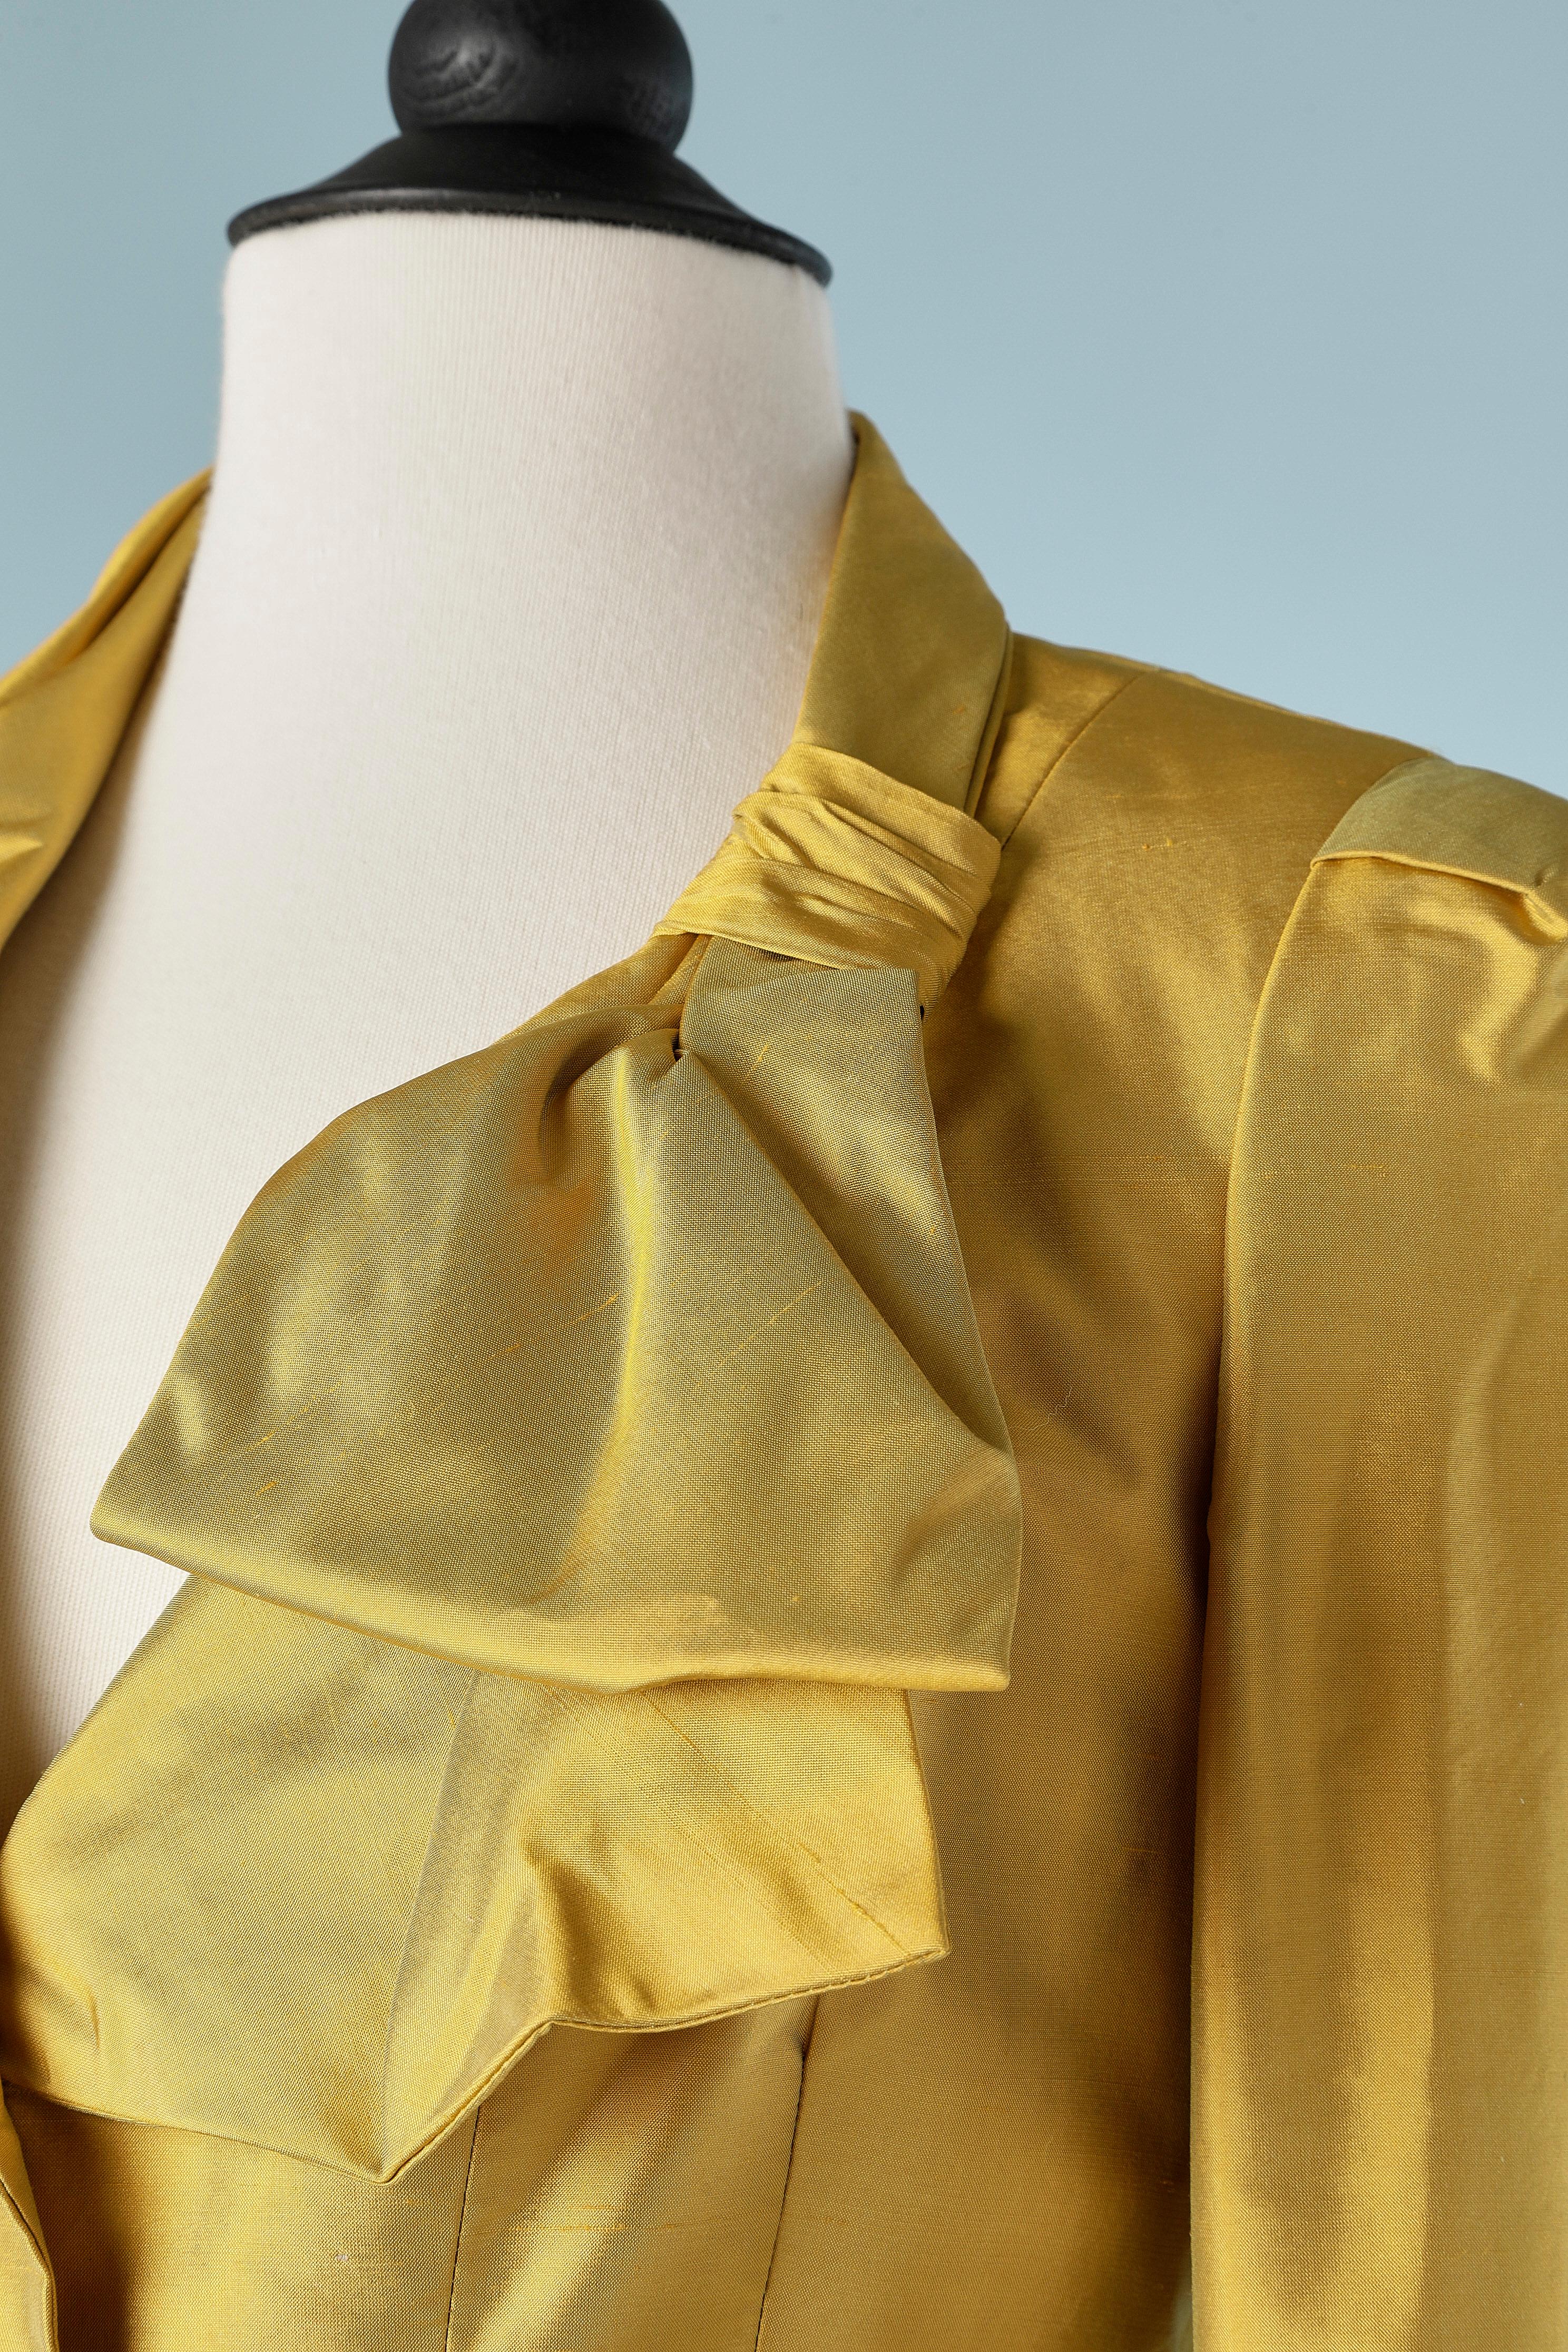 Yellow raw silk cocktail single-breasted jacket with bow on pocket and collar.
Acetate lining. Buttons are covered with the same fabric. 
SIZE 40(It) 36 (Fr) 6 (US) 